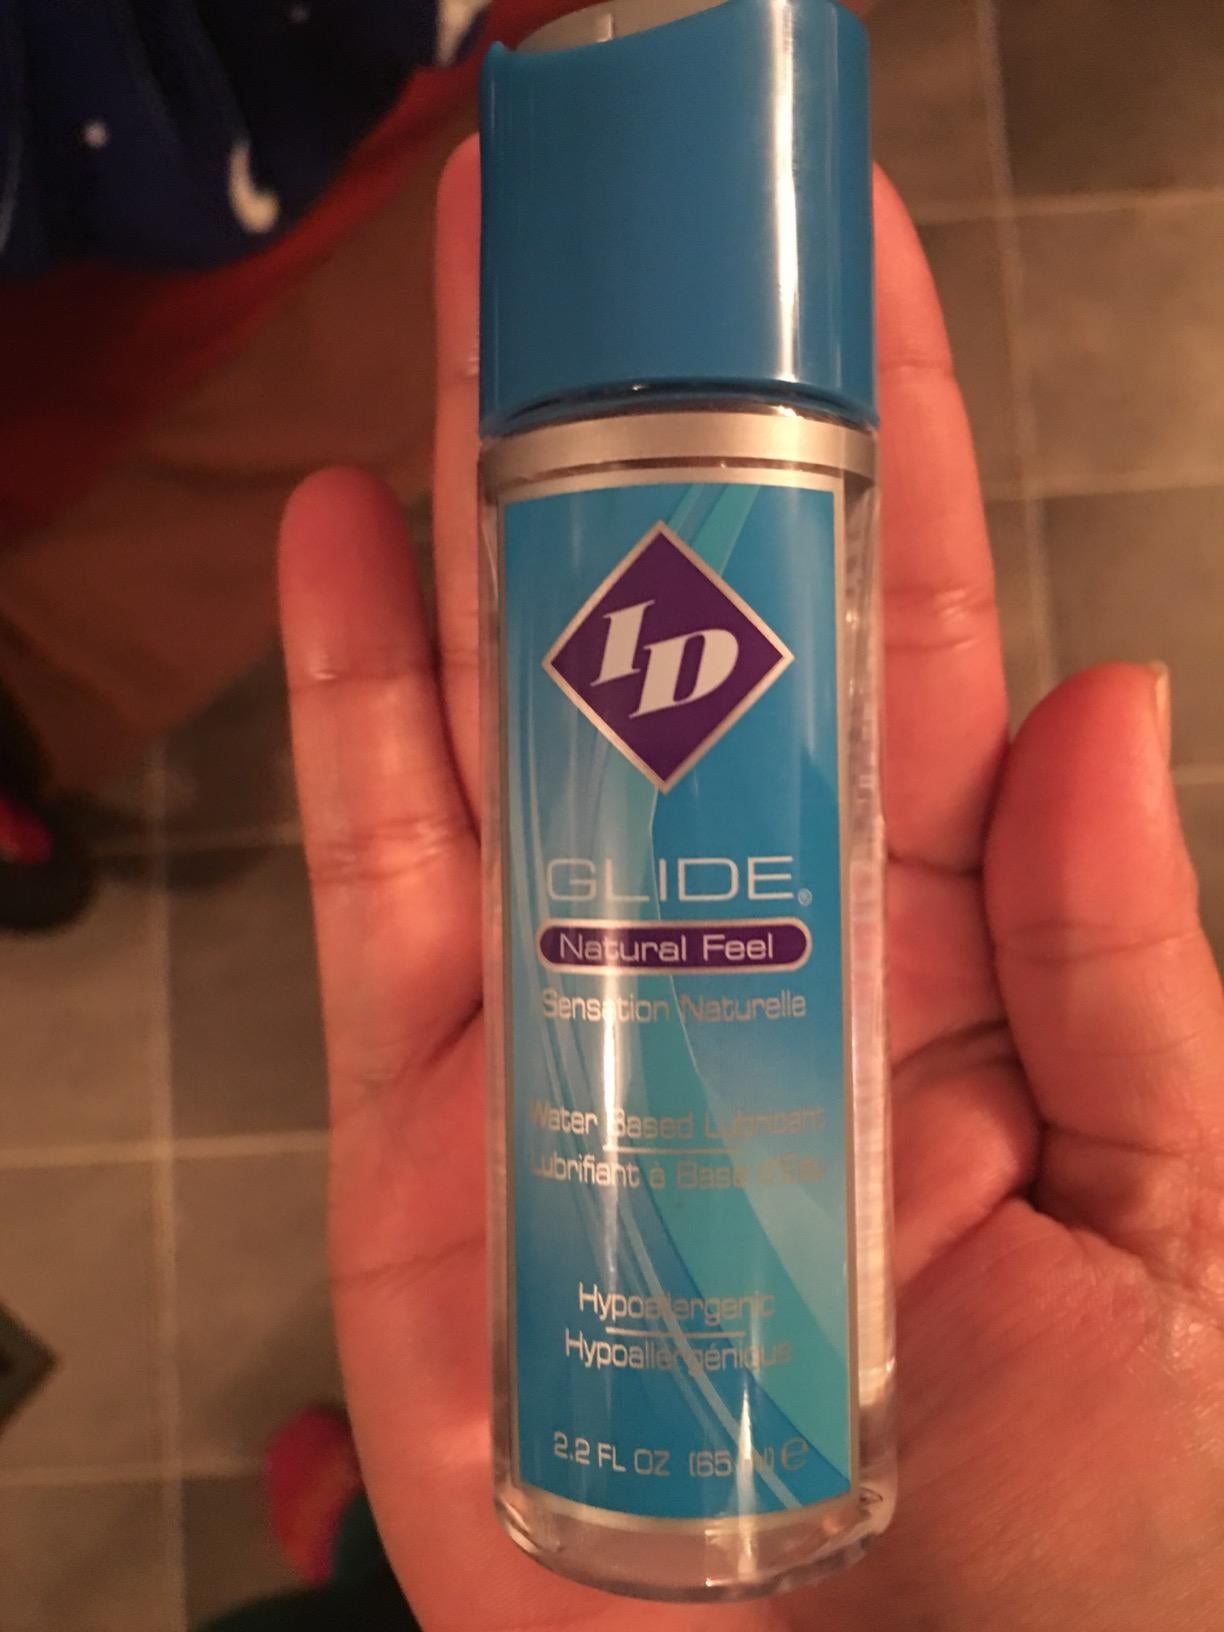 Model holding small bottle of ID Glide lubricant